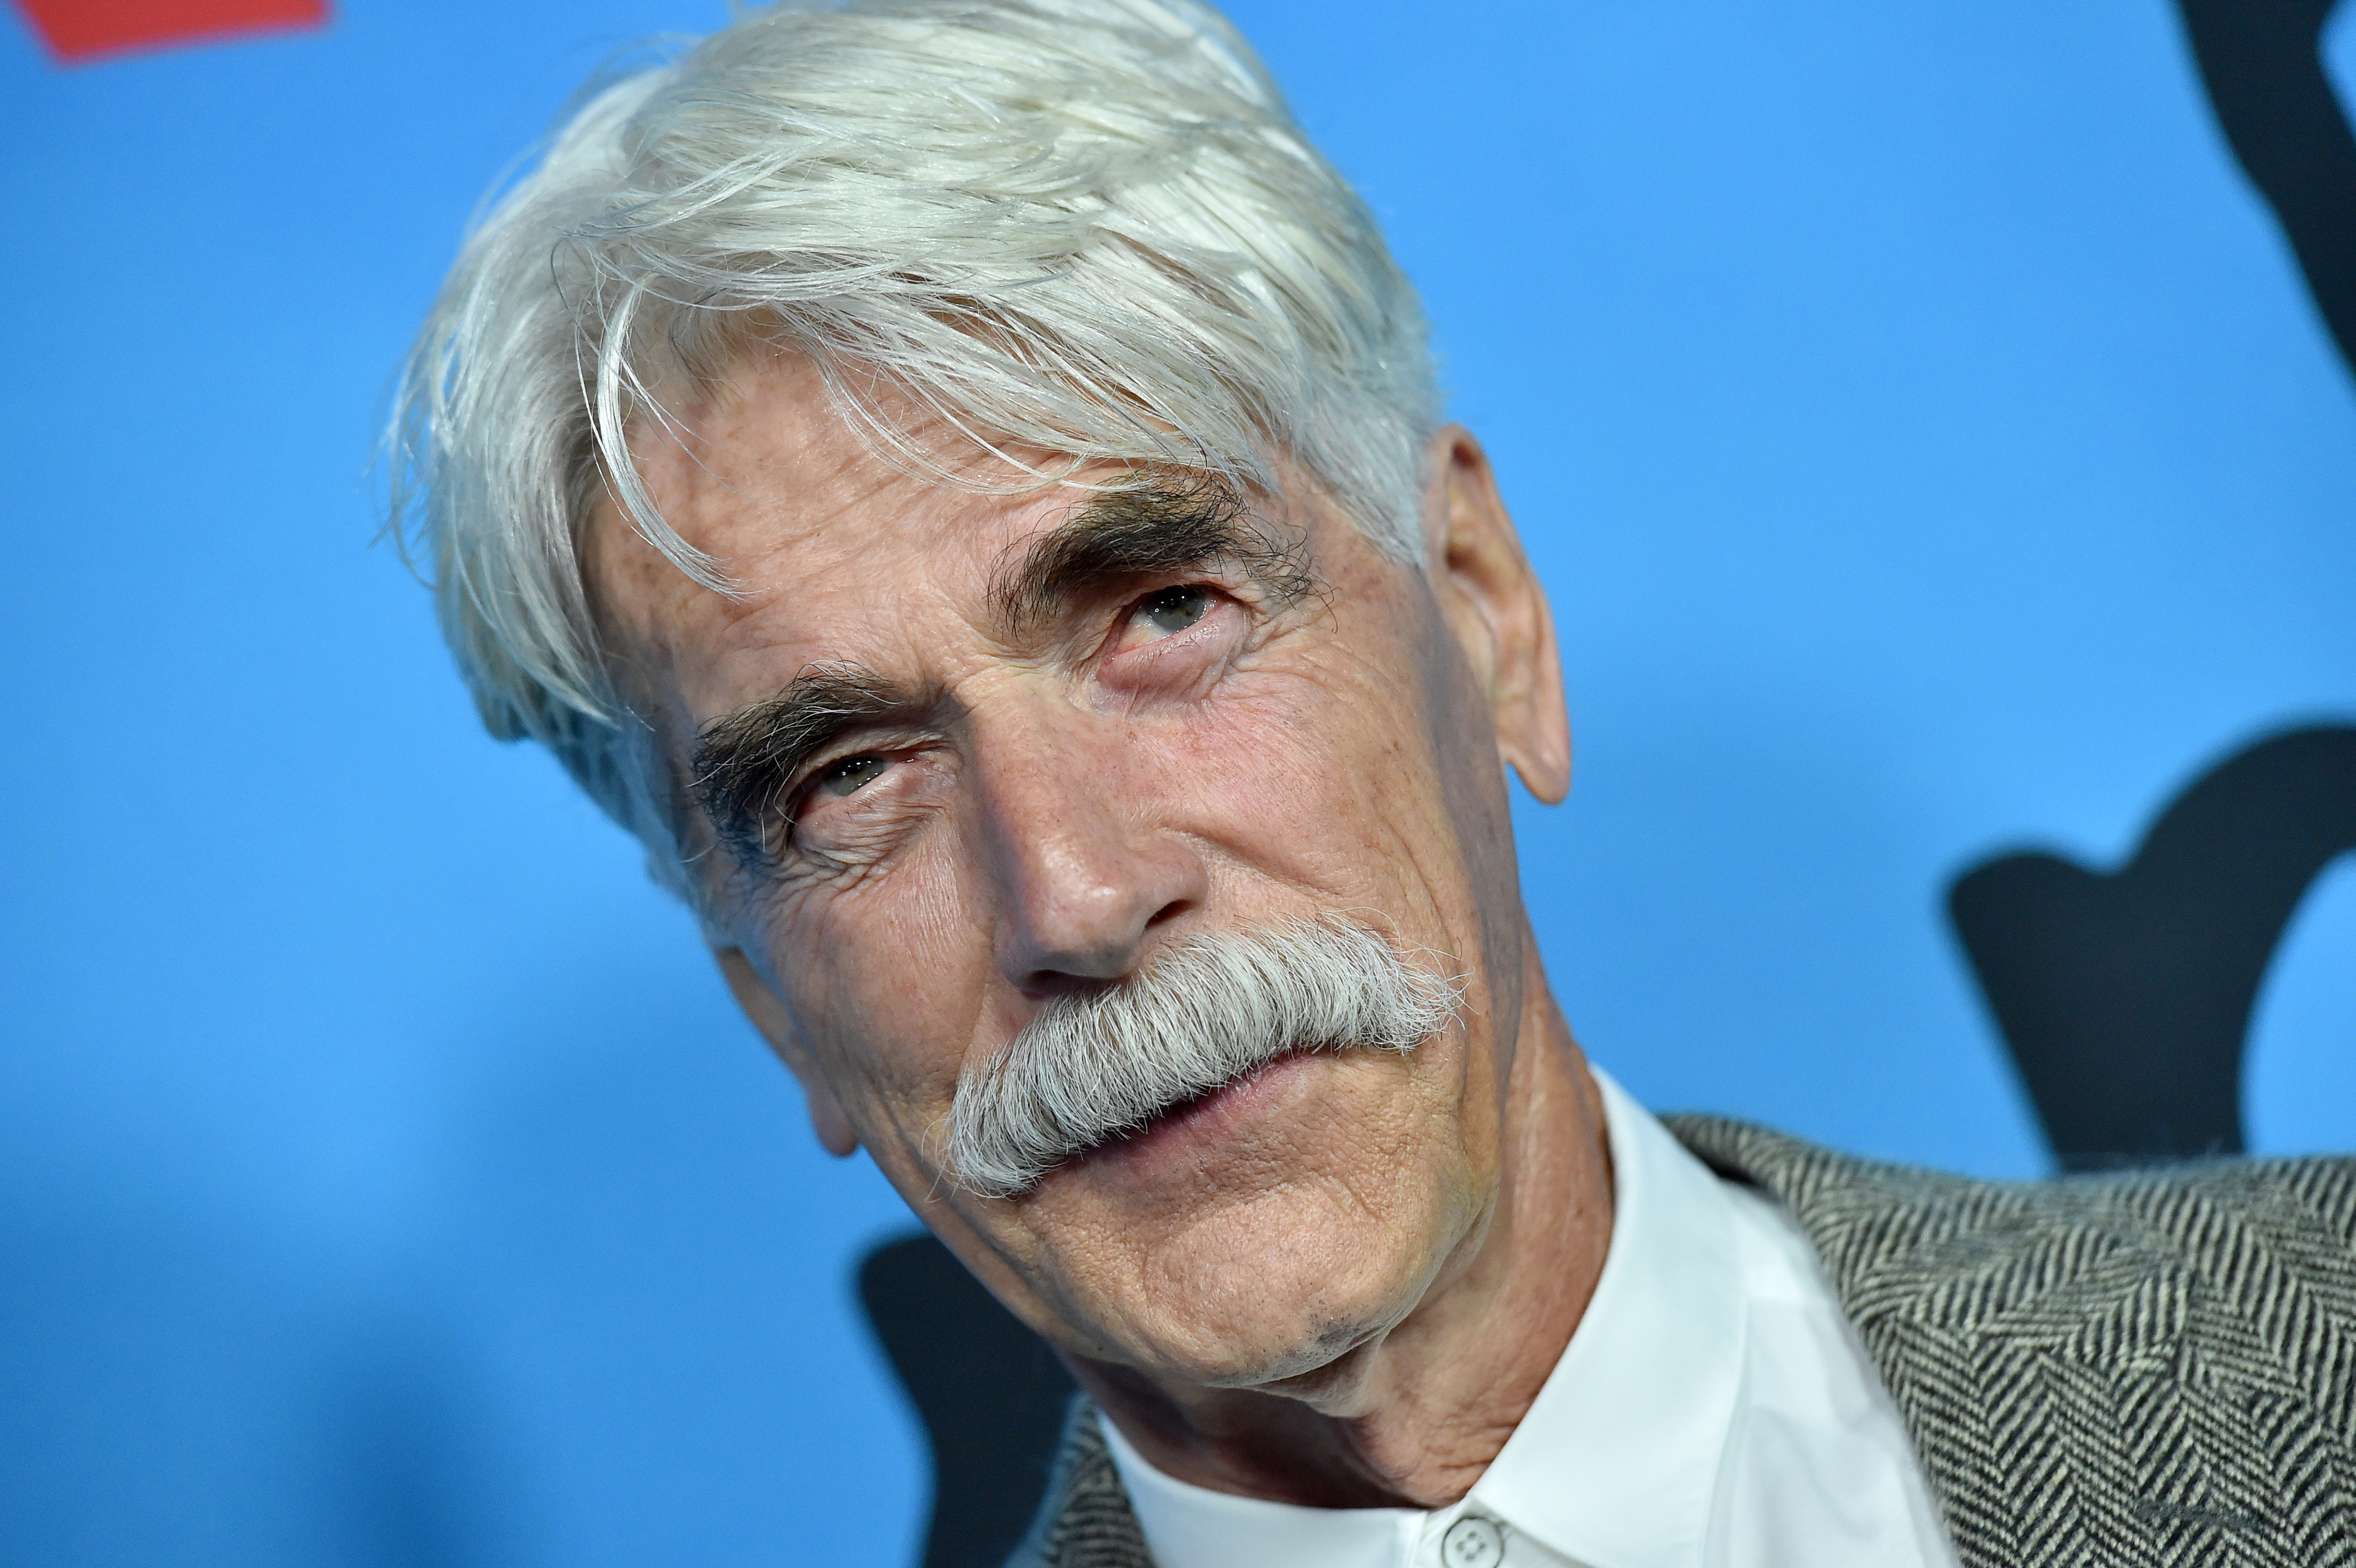 Sam Elliott attends the special screening of a film on February 24, 2020 in Hollywood, California. | Source: Getty Images